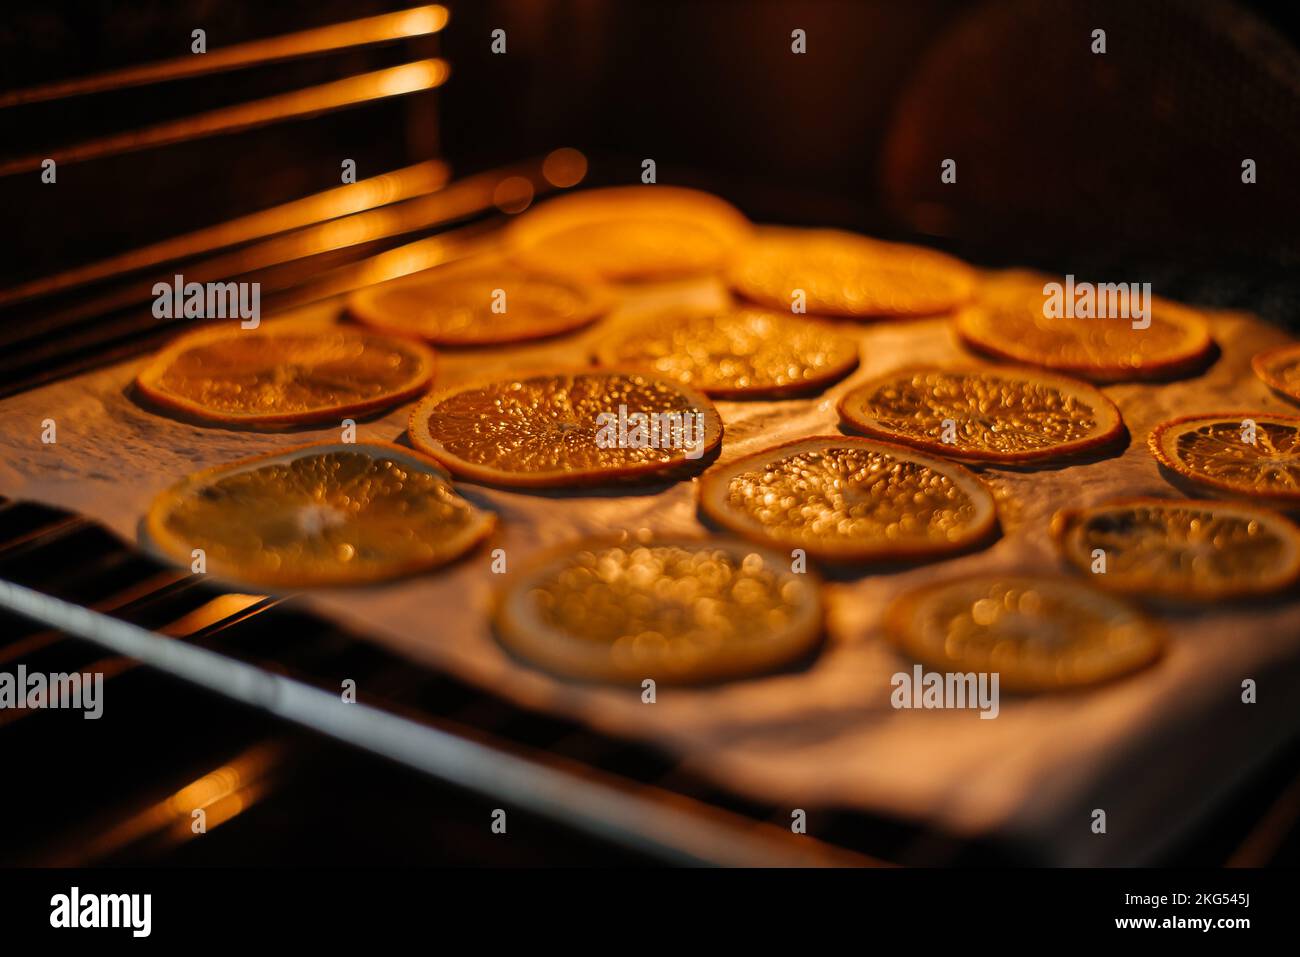 Drying orange in the oven at home for decoration. Stock Photo